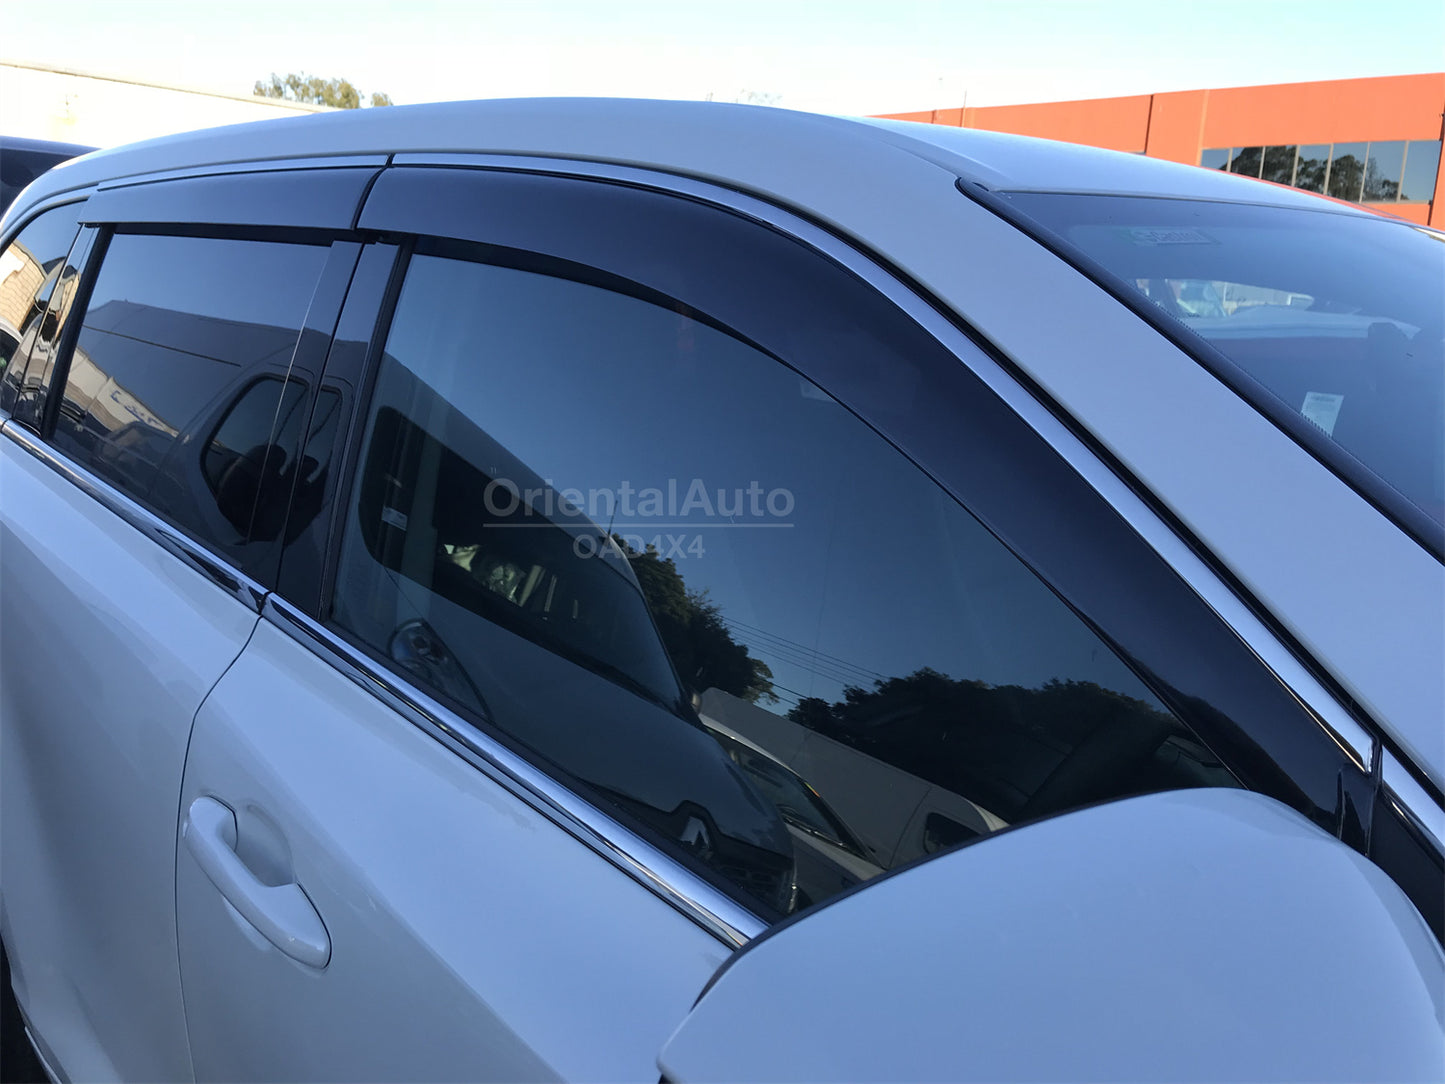 OAD Injection Stainless Weather Shields For Toyota Kluger 2013-2021 Weathershields Window Visors